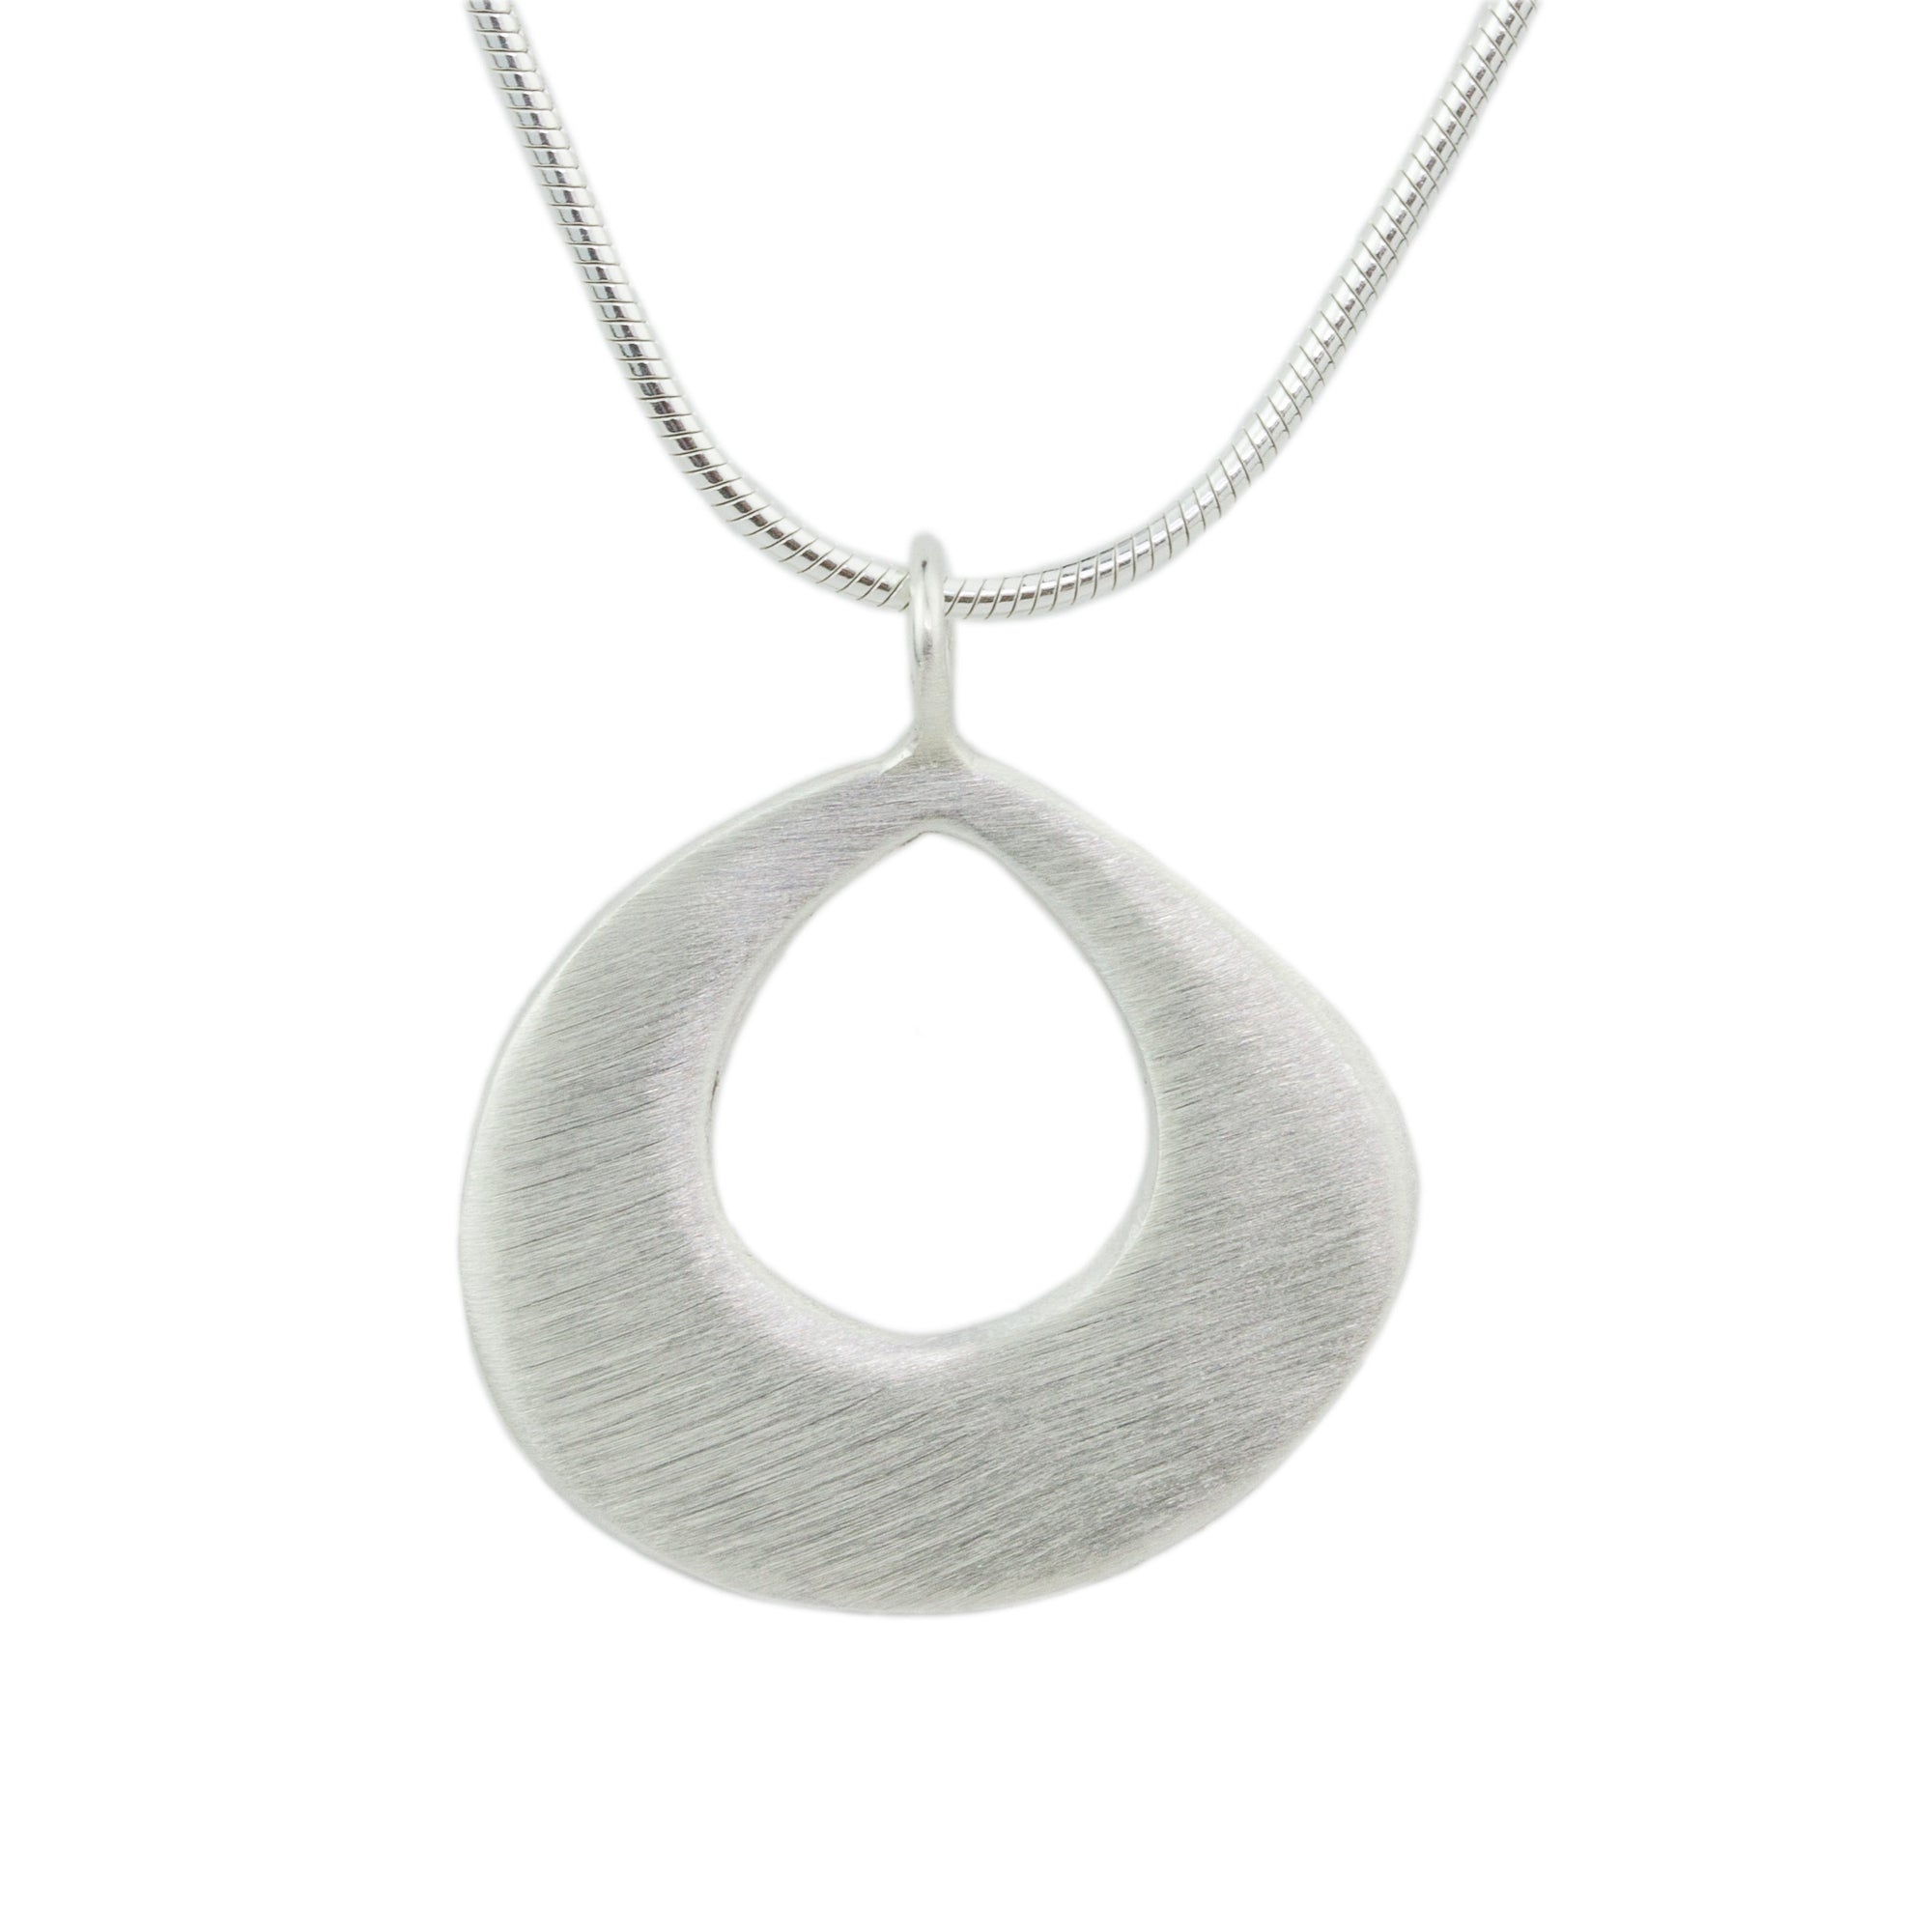 Thick Open Drop Necklace